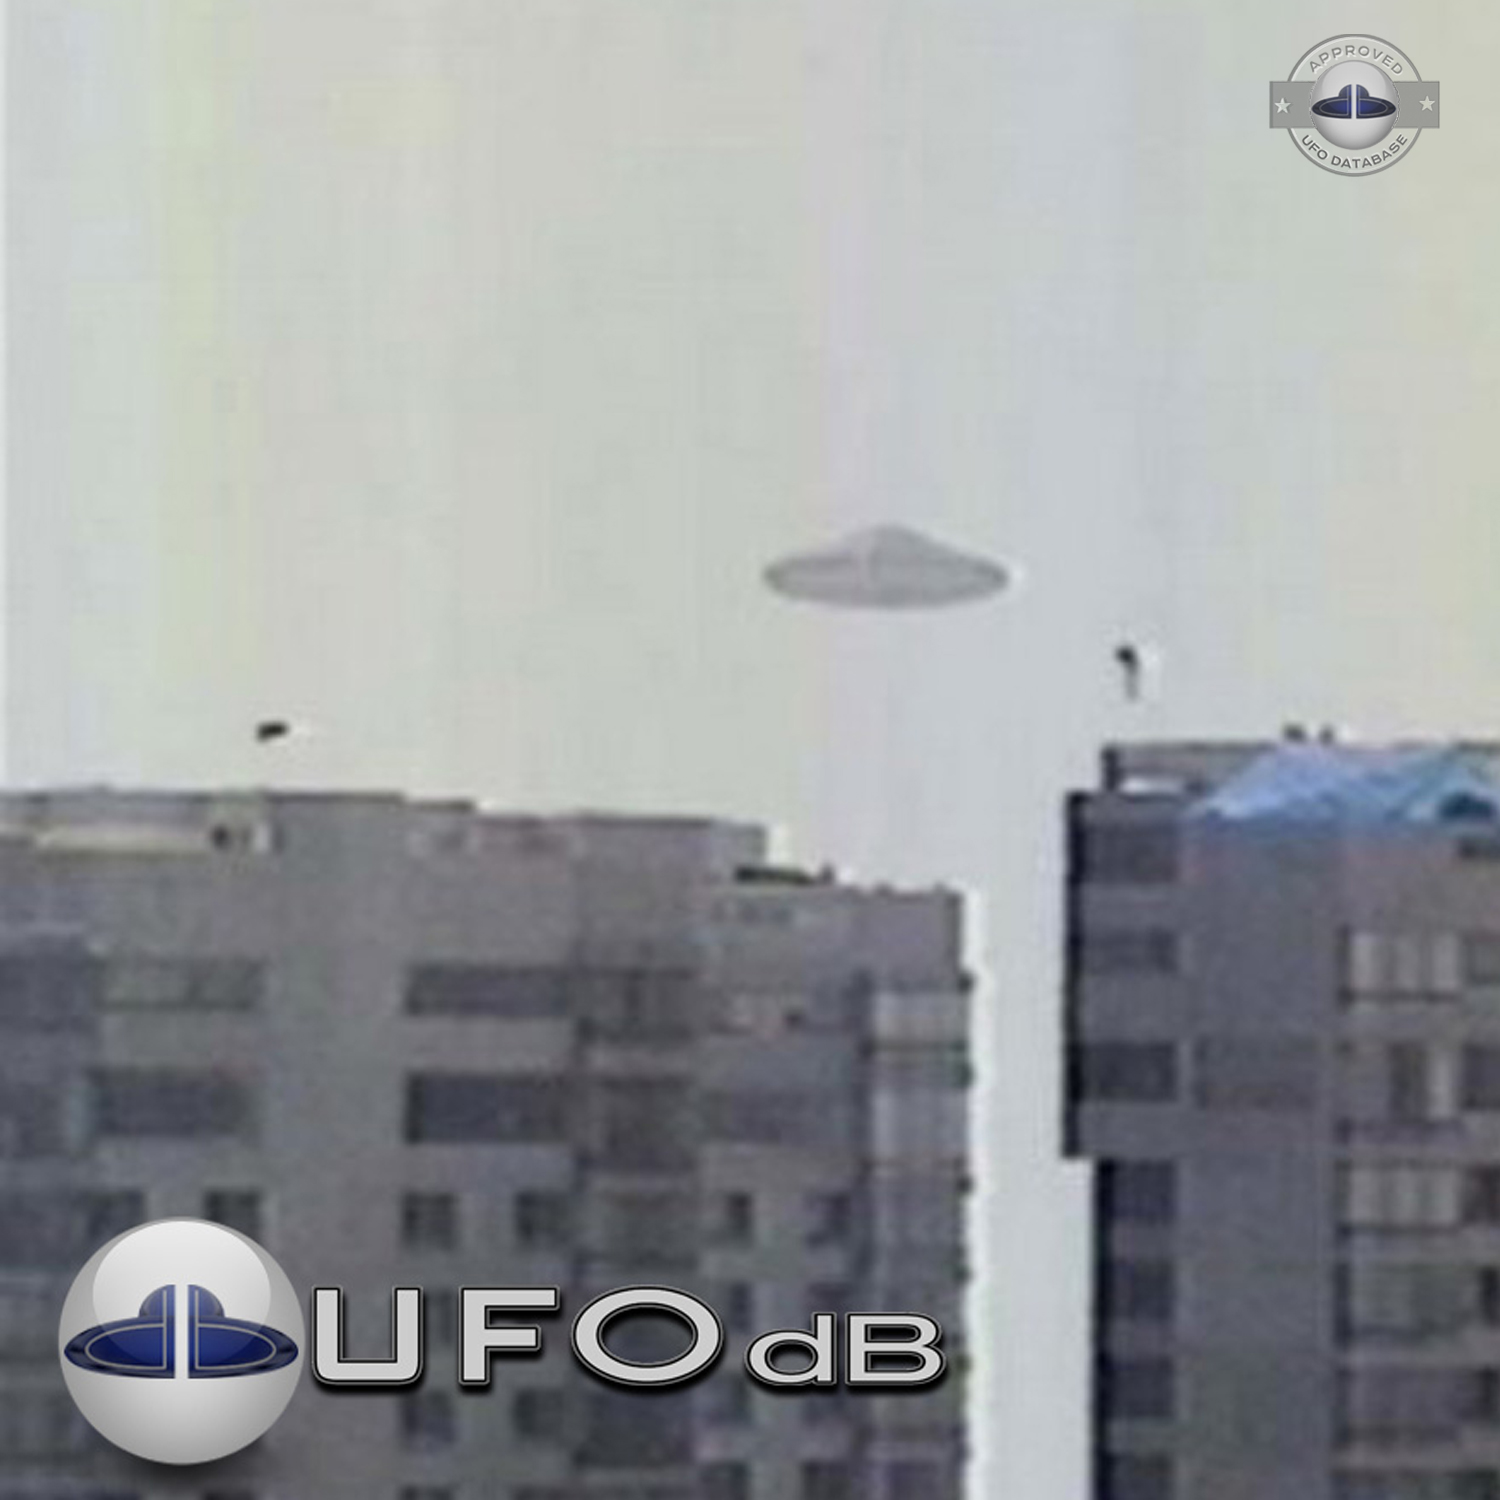 Mexico city August 6 1997 UFO Pictures from famous video (UFOdB.com) UFO Picture #55-2